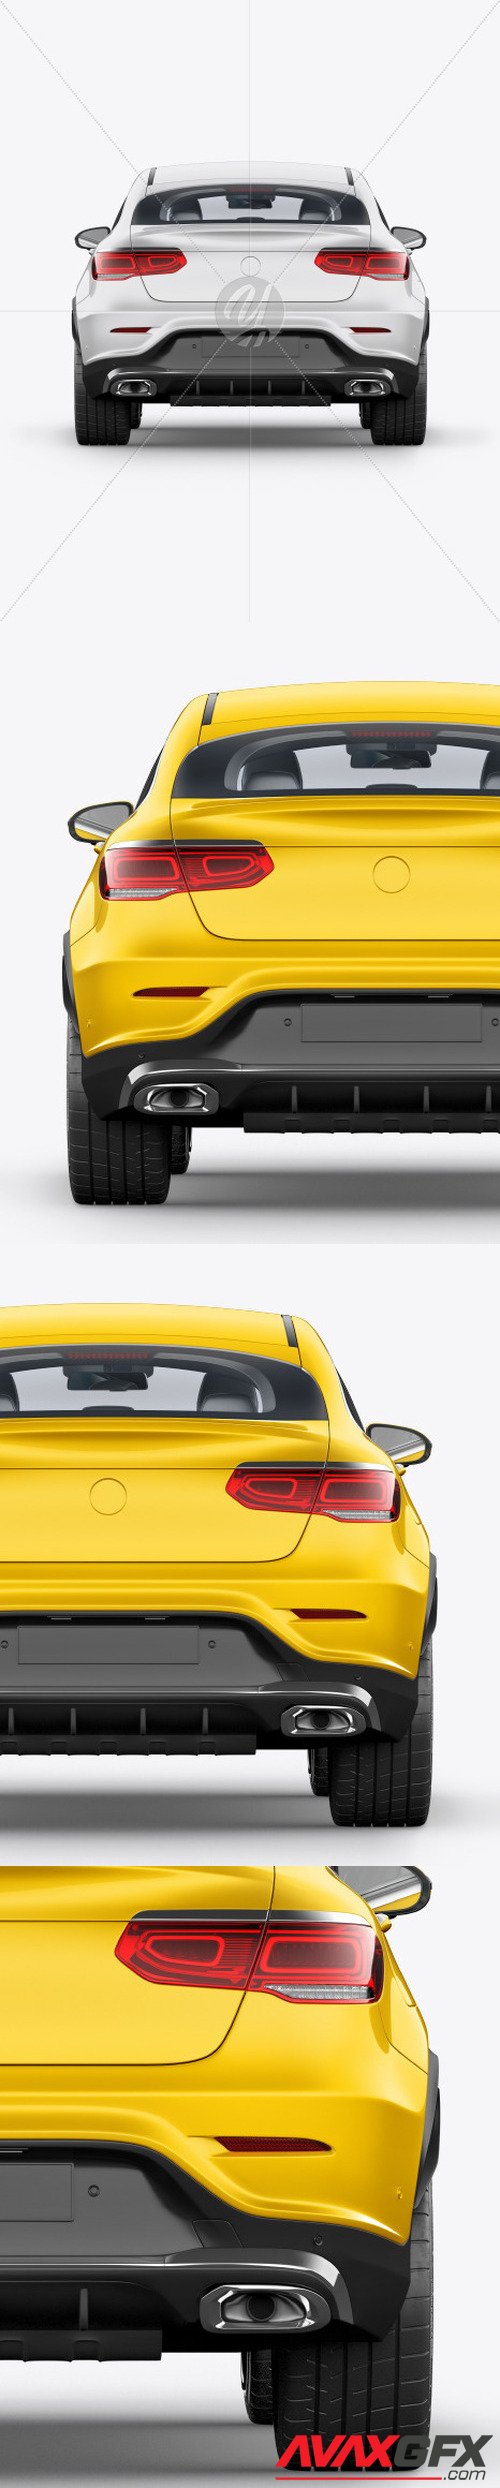 Coupe Crossover SUV Mockup - Back View 48146 [TIF]